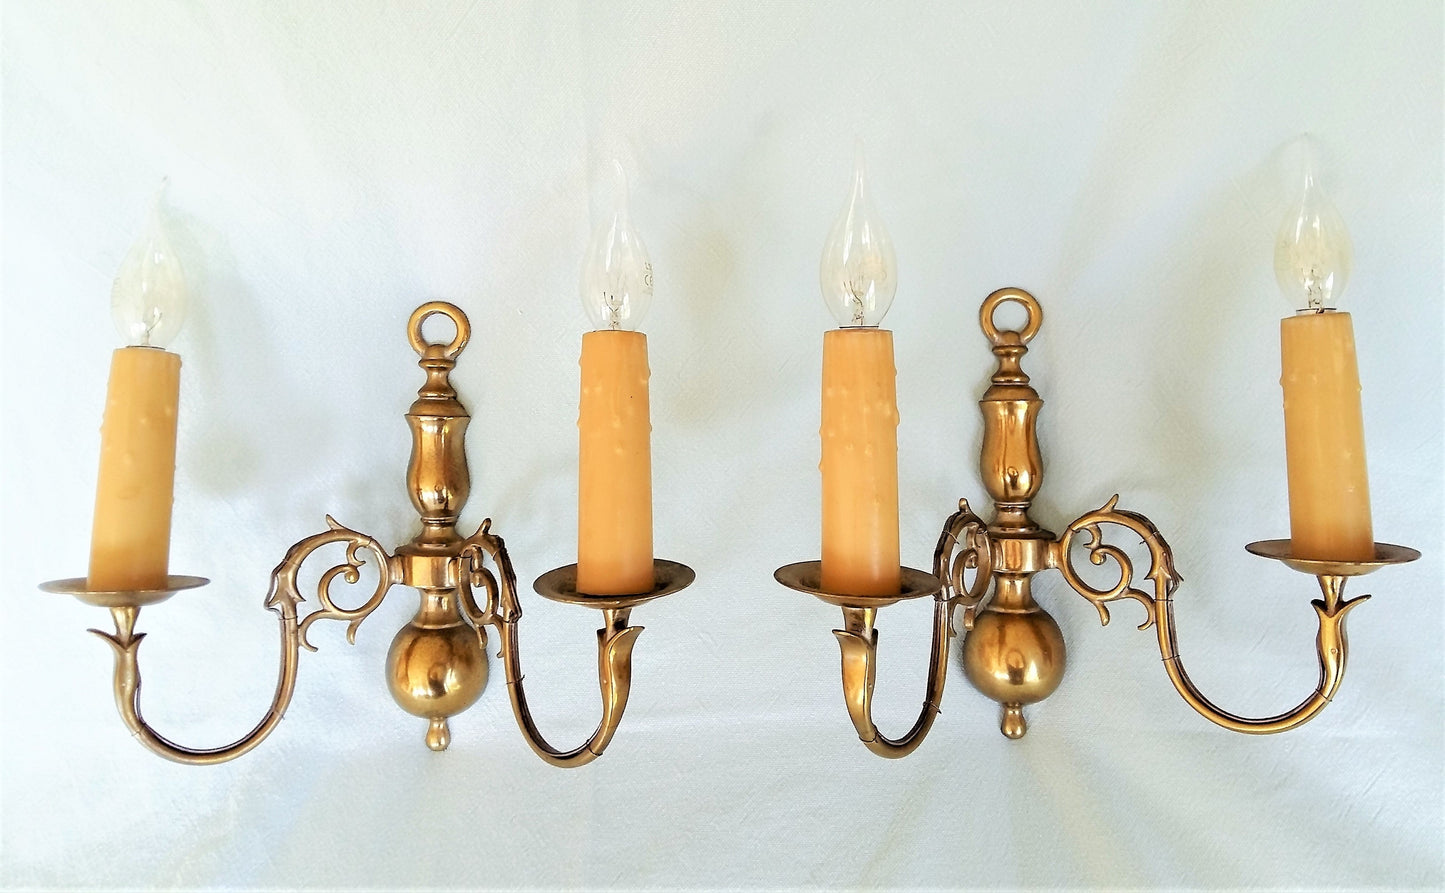 Pair of Bronze Wall Light/ Sconces from Tiggy & Pip - €140.00! Shop now at Tiggy and Pip